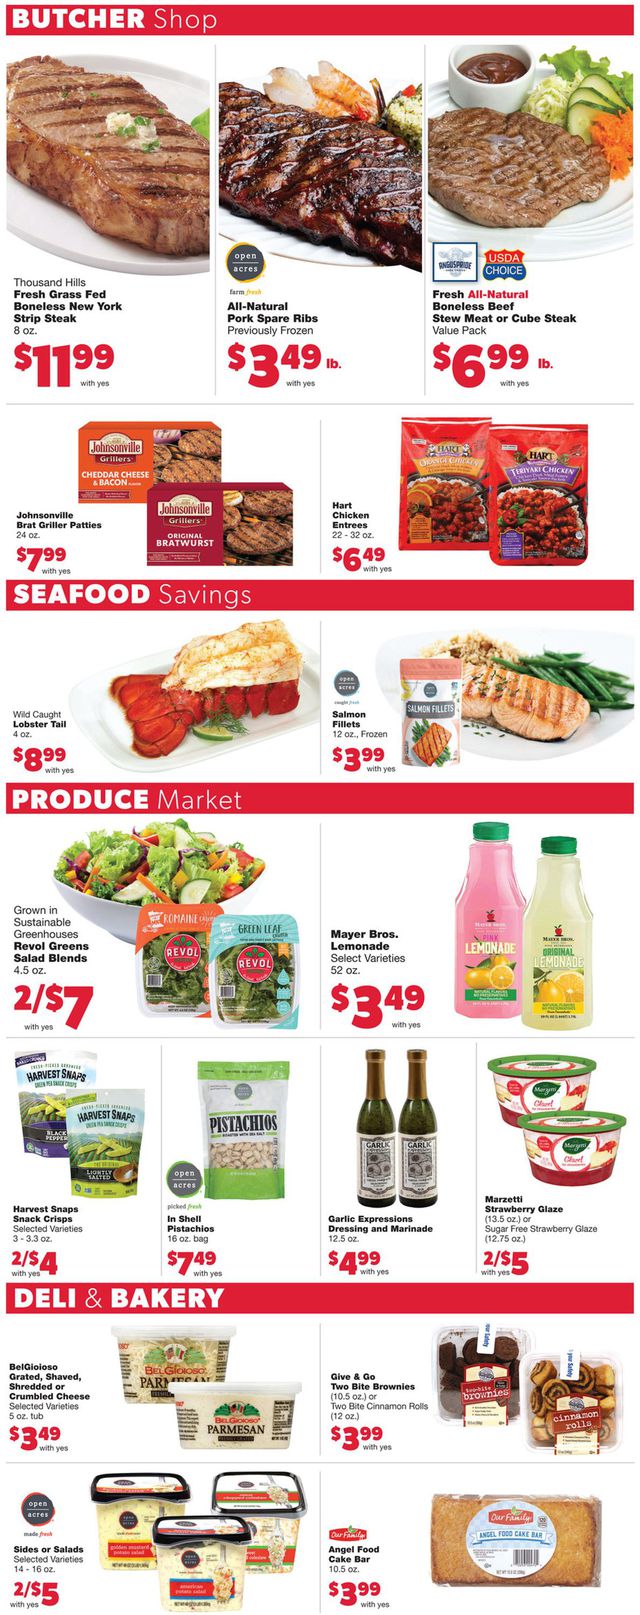 Family Fare Ad from 07/06/2022